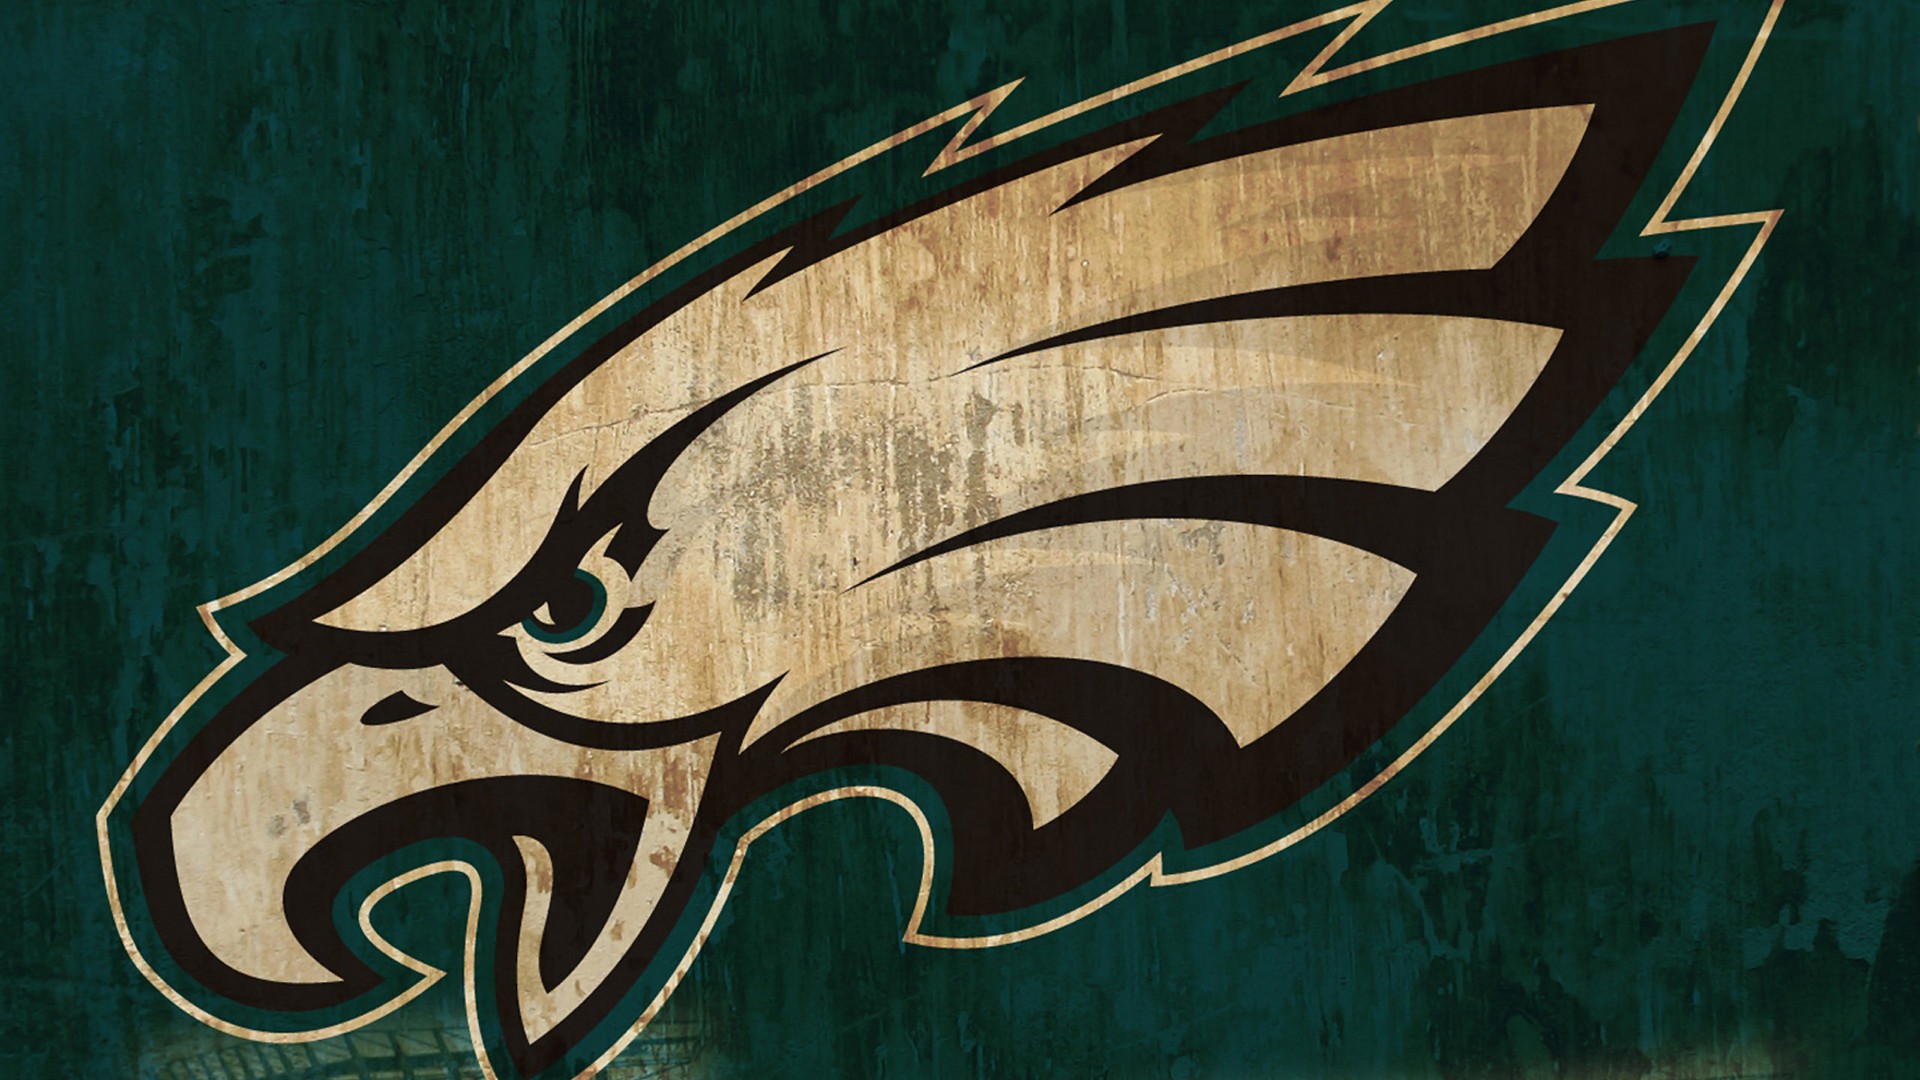 Wallpapers HD Phila Eagles with resolution 1920x1080 pixel. You can make this wallpaper for your Mac or Windows Desktop Background, iPhone, Android or Tablet and another Smartphone device